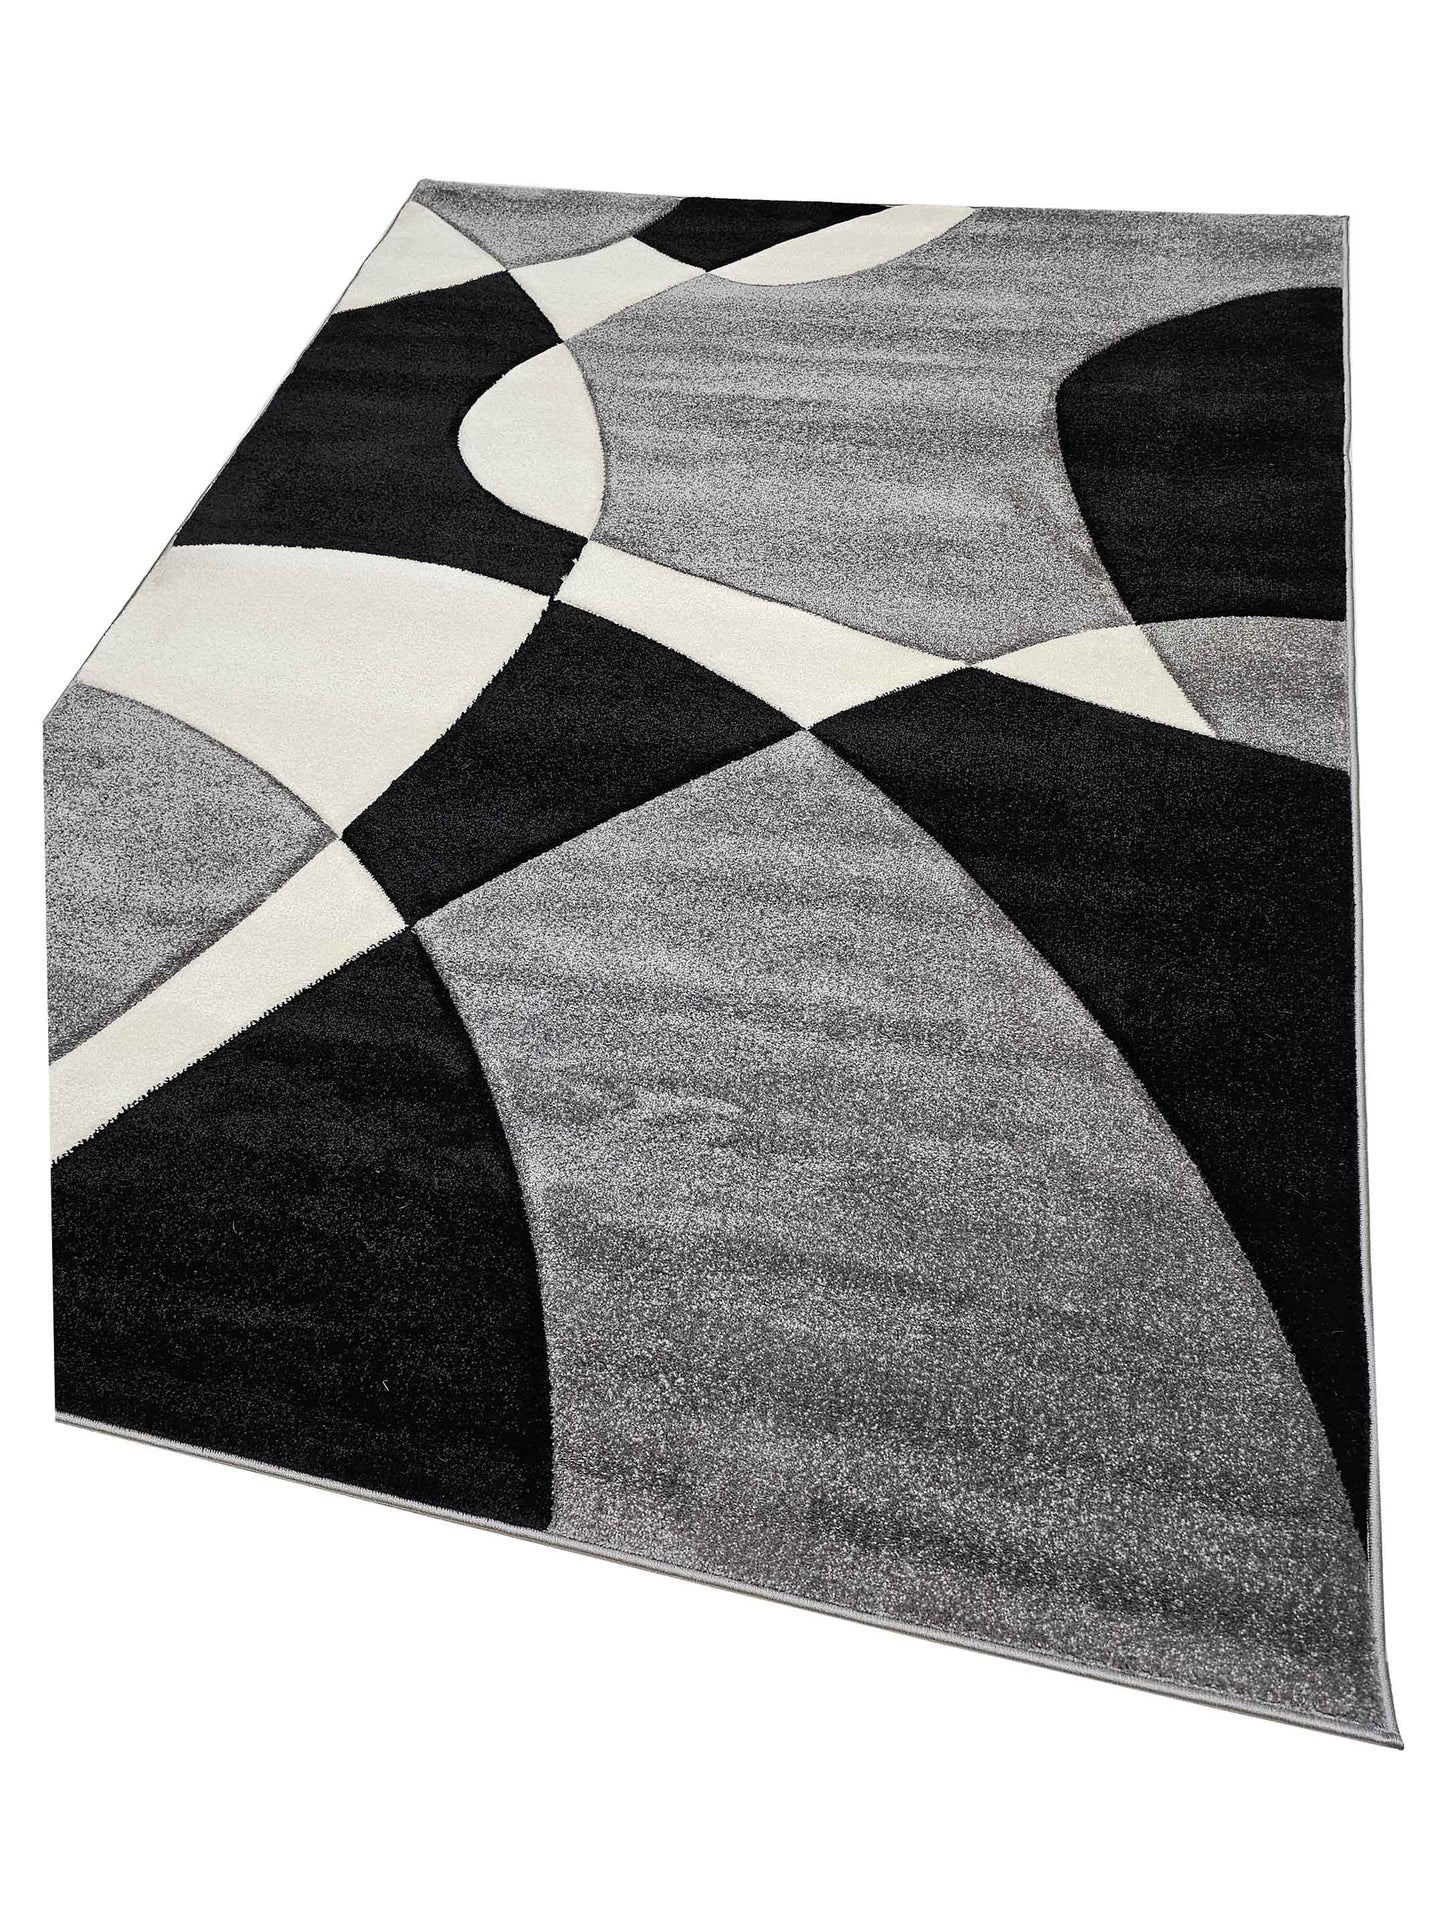 American Cover Design Hollywood  H-284 Gray  Modern Machinemade Rug